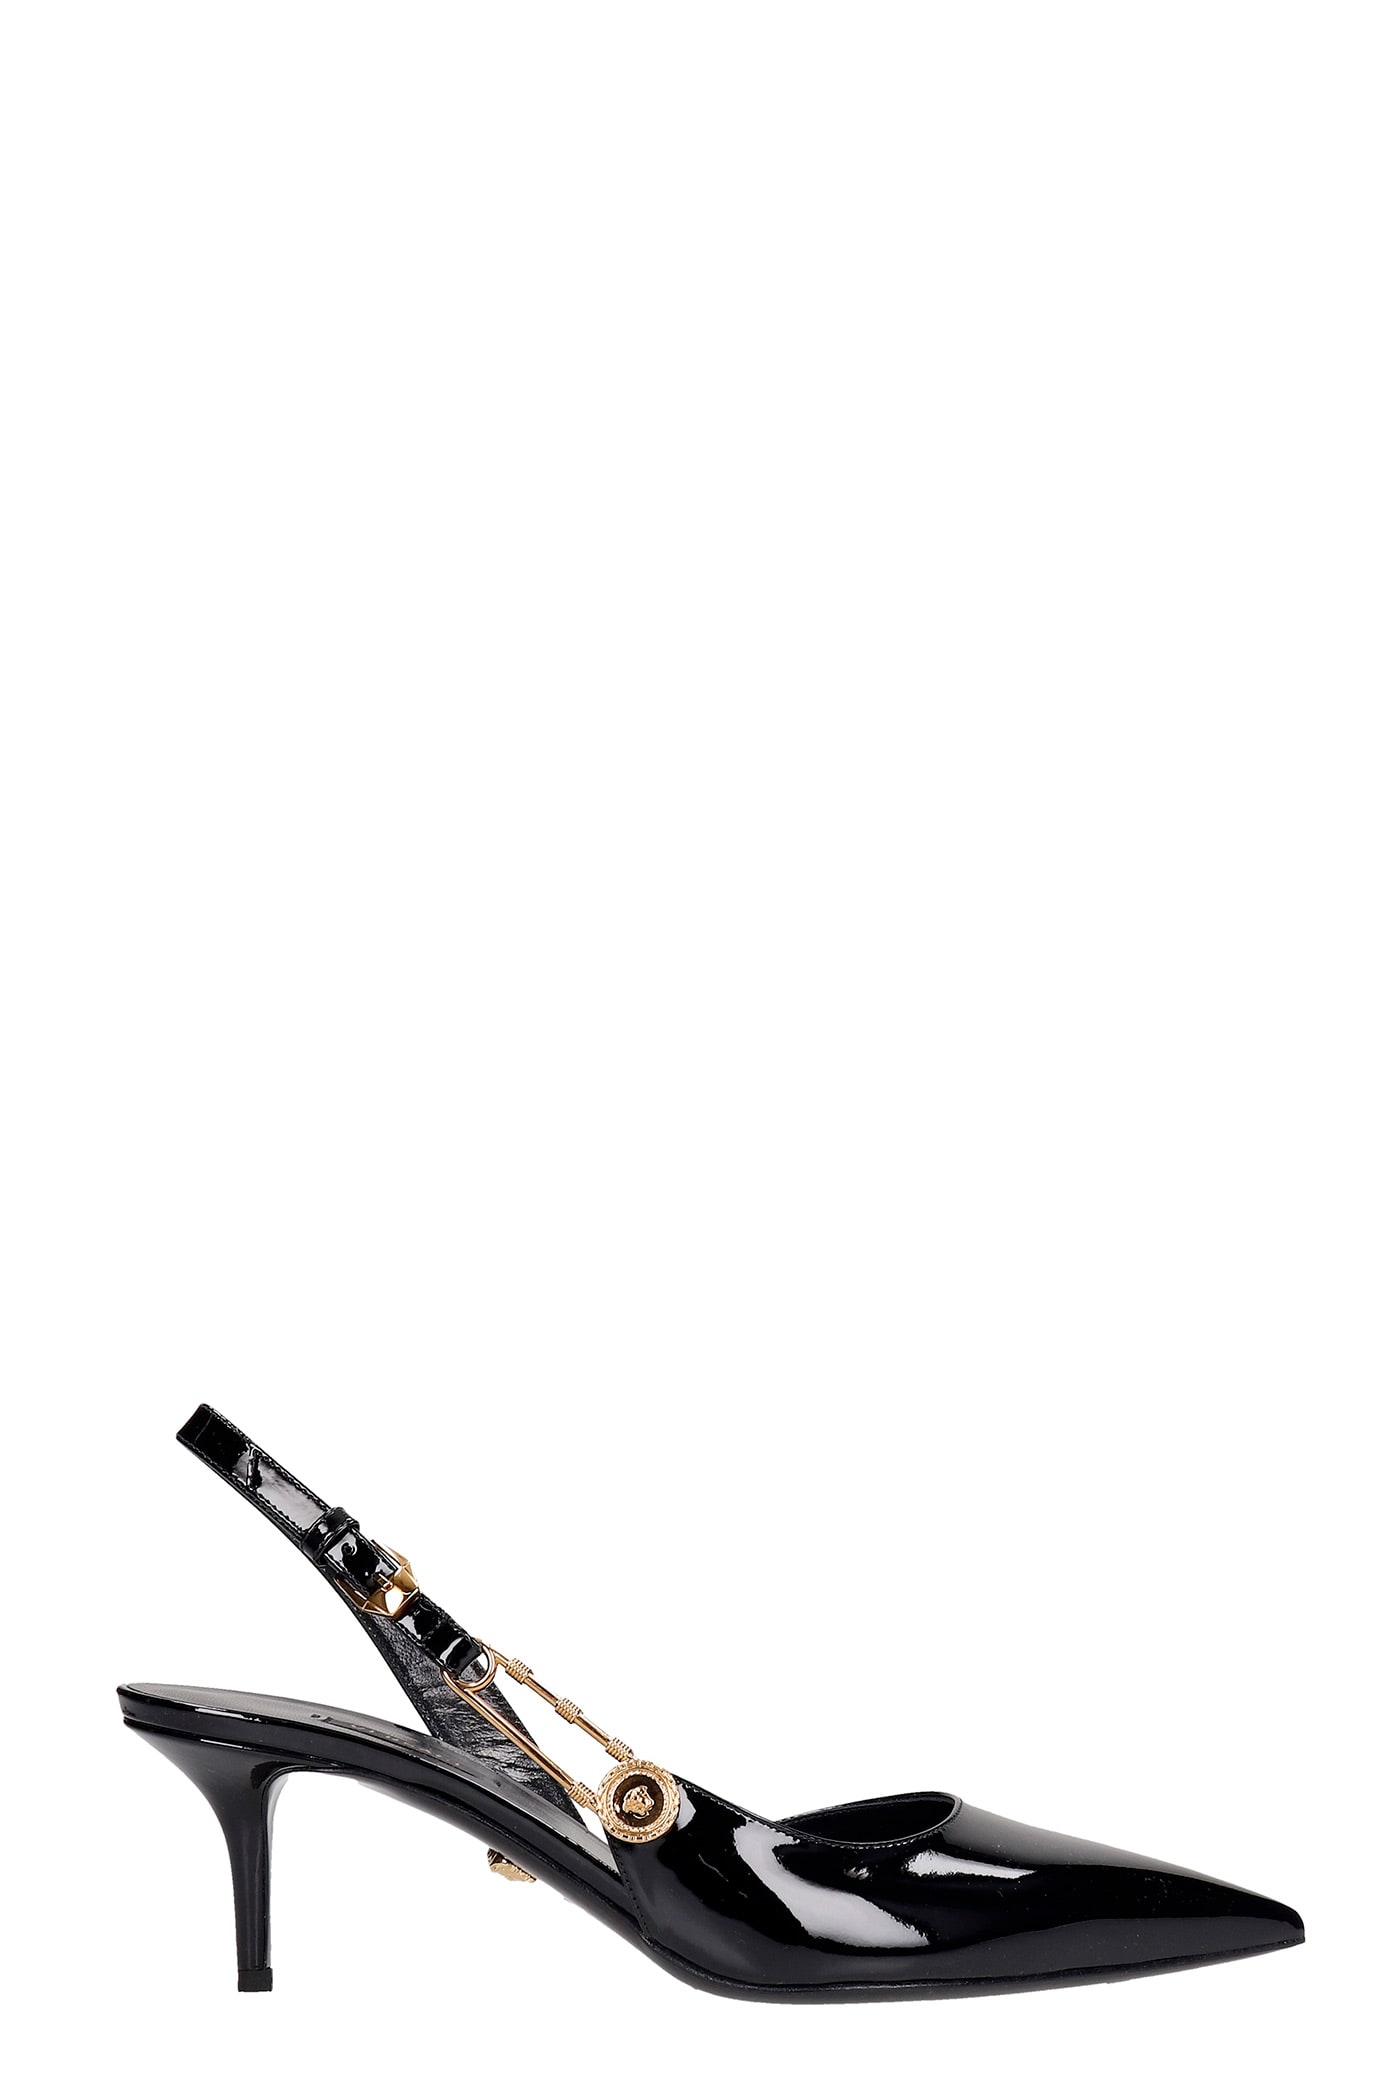 Buy Versace Pumps In Black Patent Leather online, shop Versace shoes with free shipping